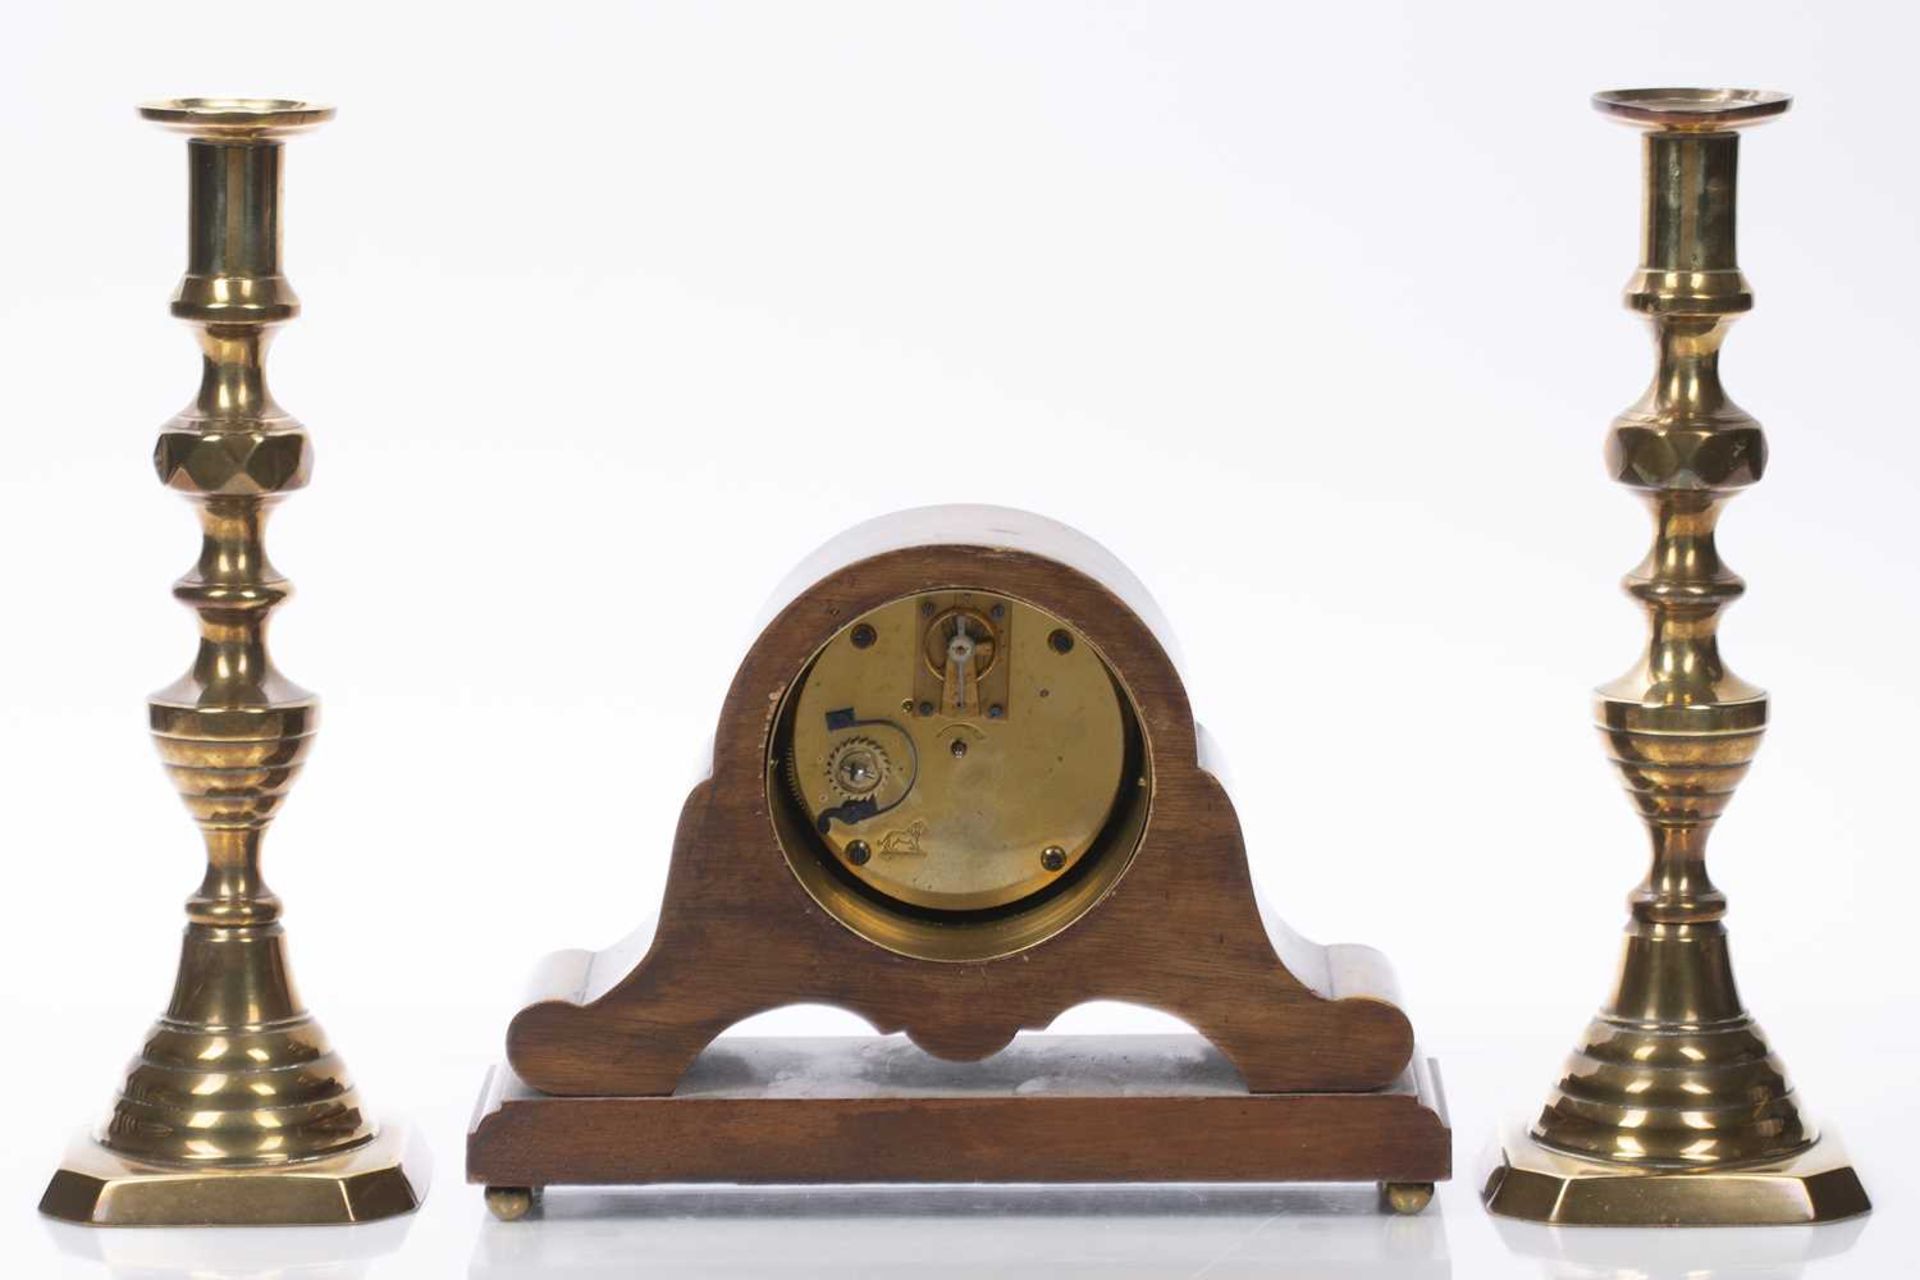 Lashmore of Oswestry walnut mantel clock with marquetry decoration, 17cm high and a pair of brass - Image 2 of 3